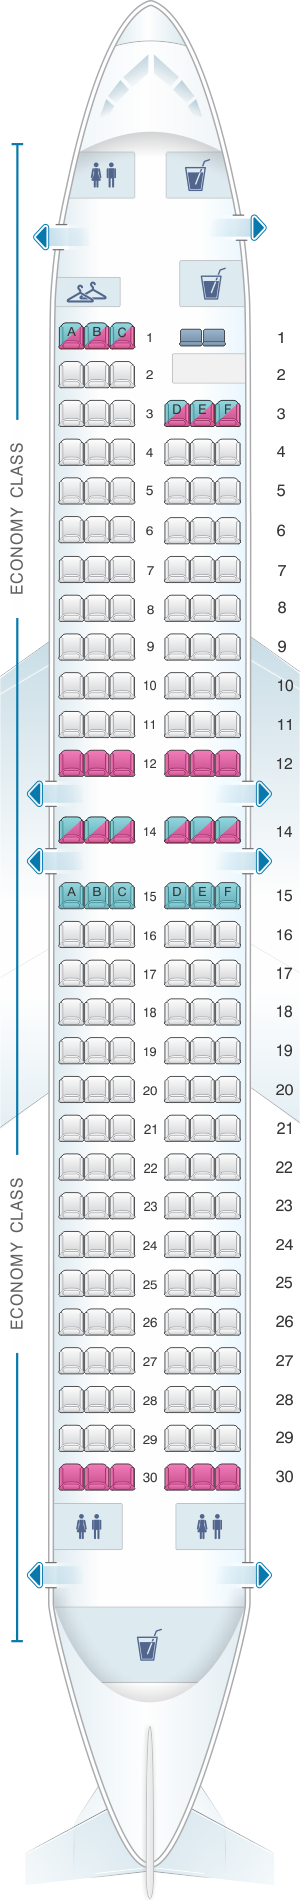 Seat map for Miami Air Boeing B737 800 Config. 2